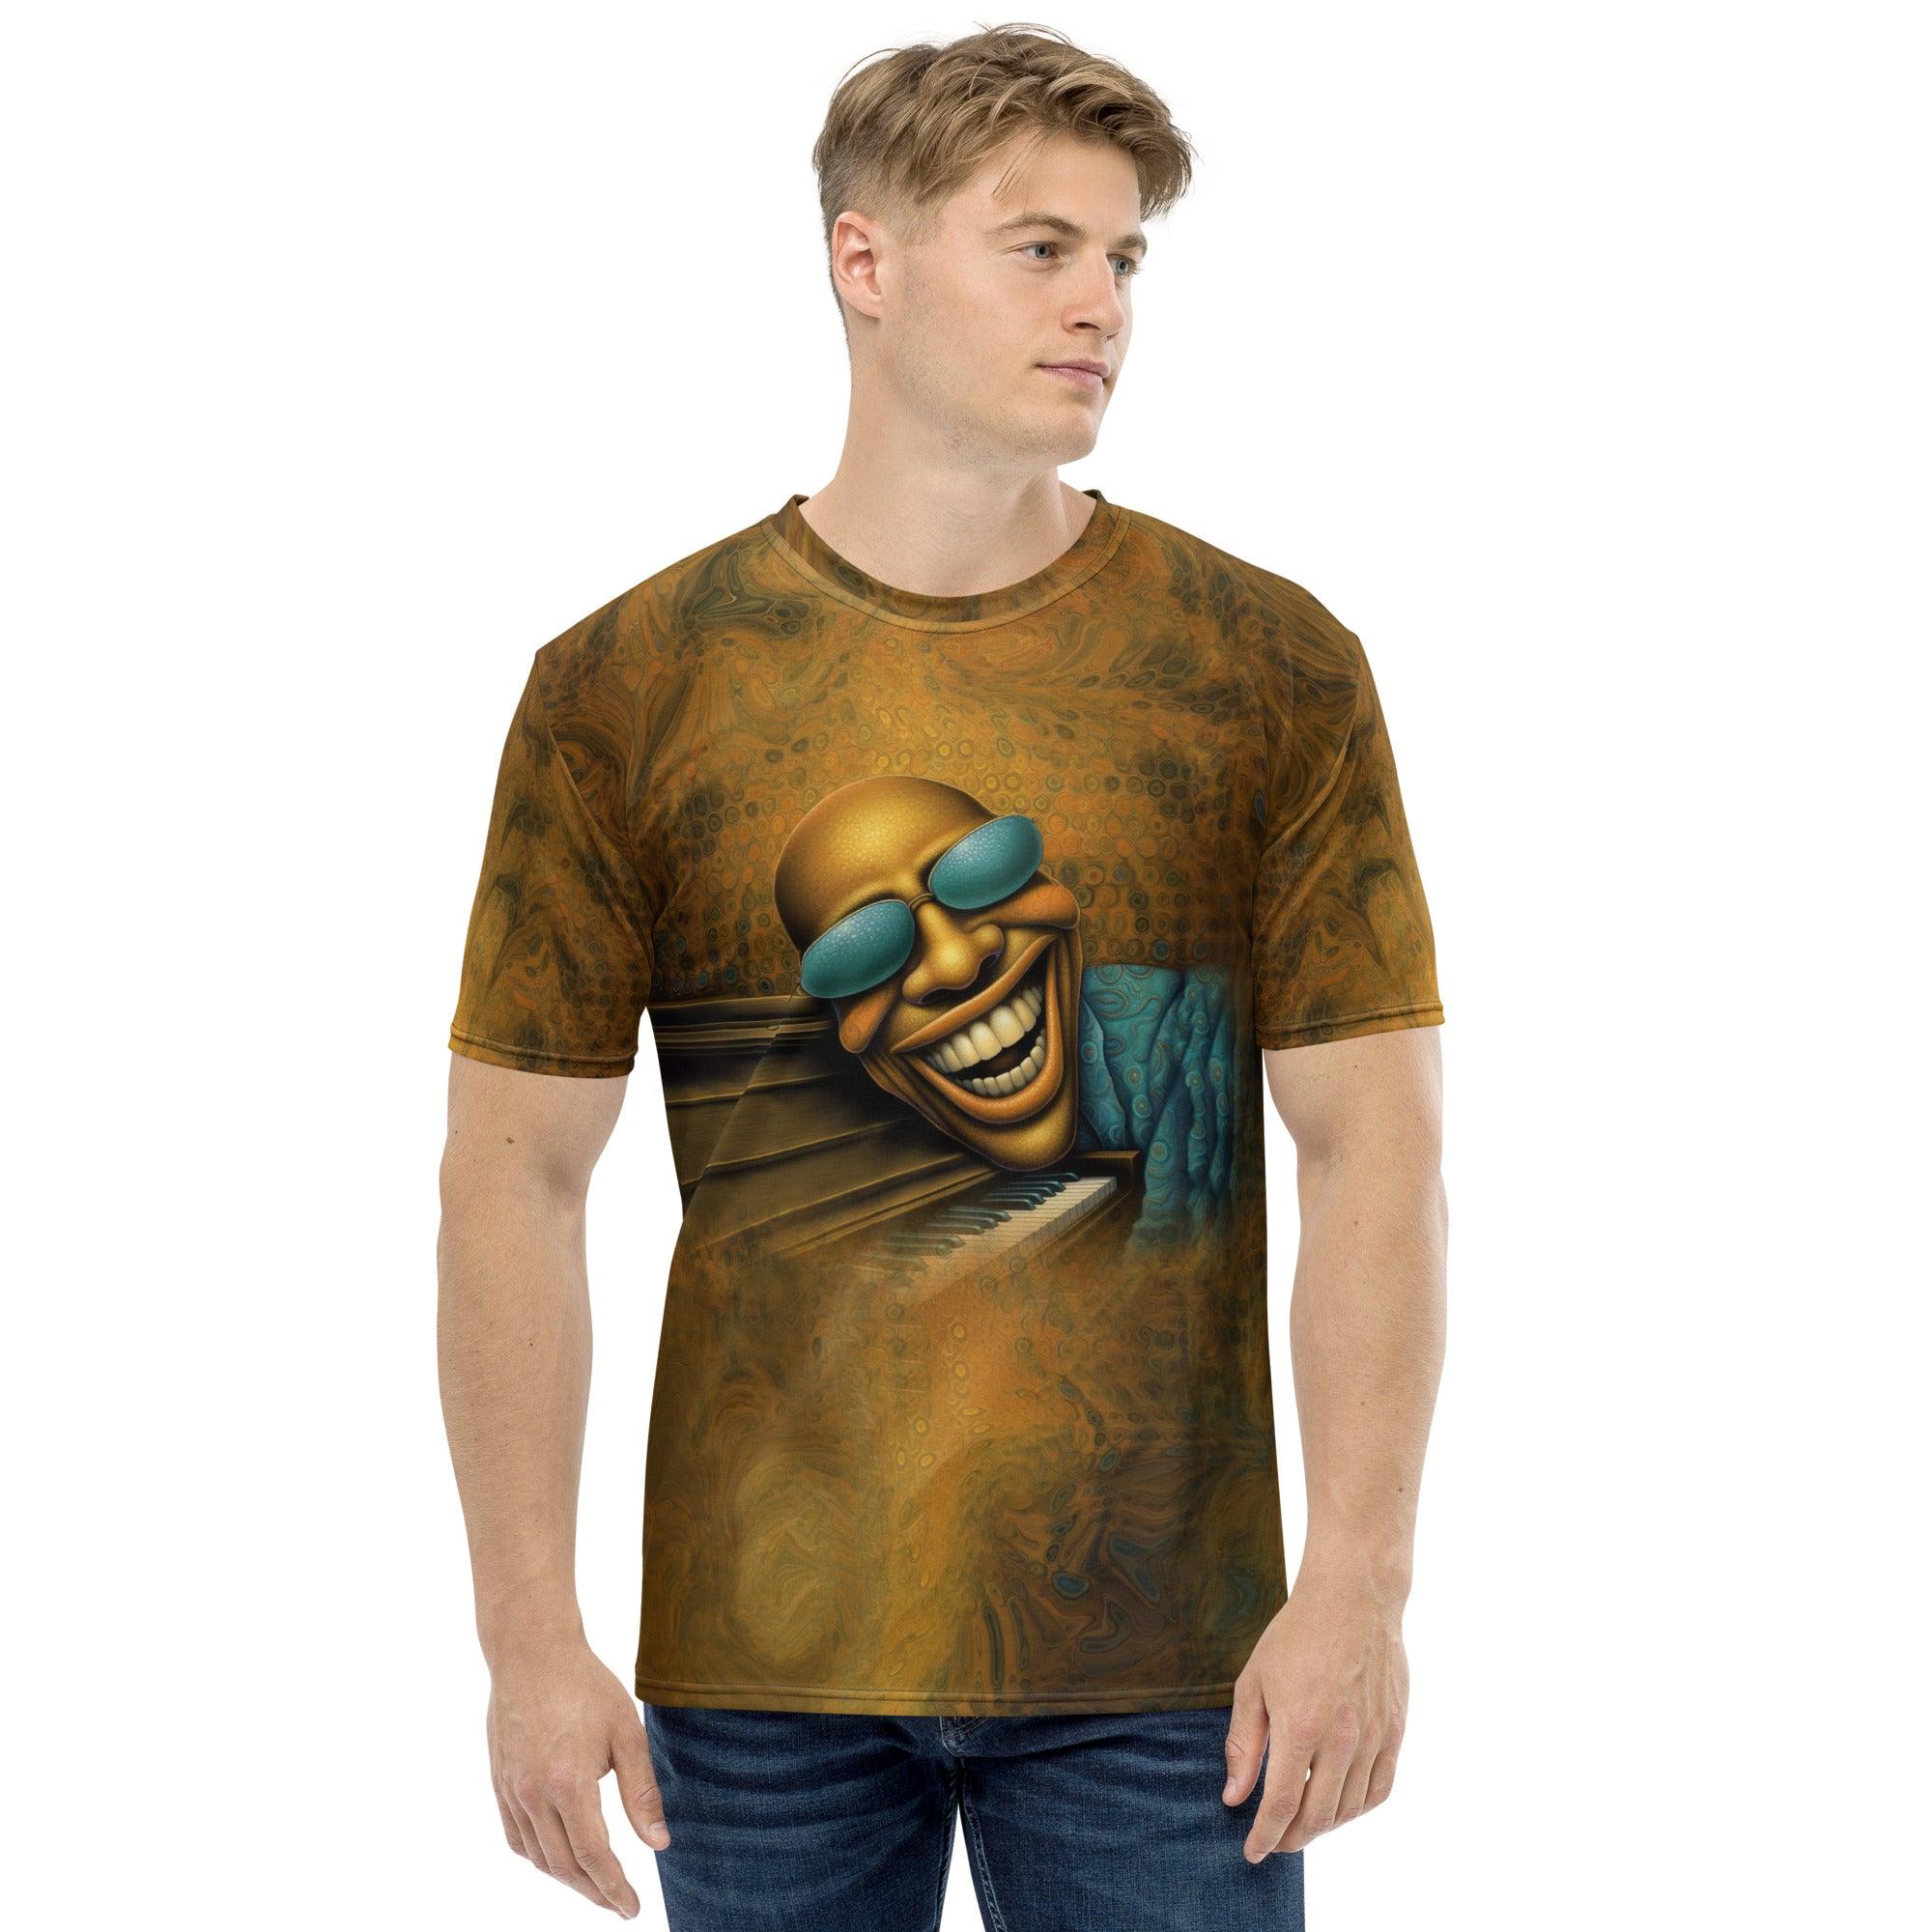 Radiant Reflections IV Men's T-shirt front view.